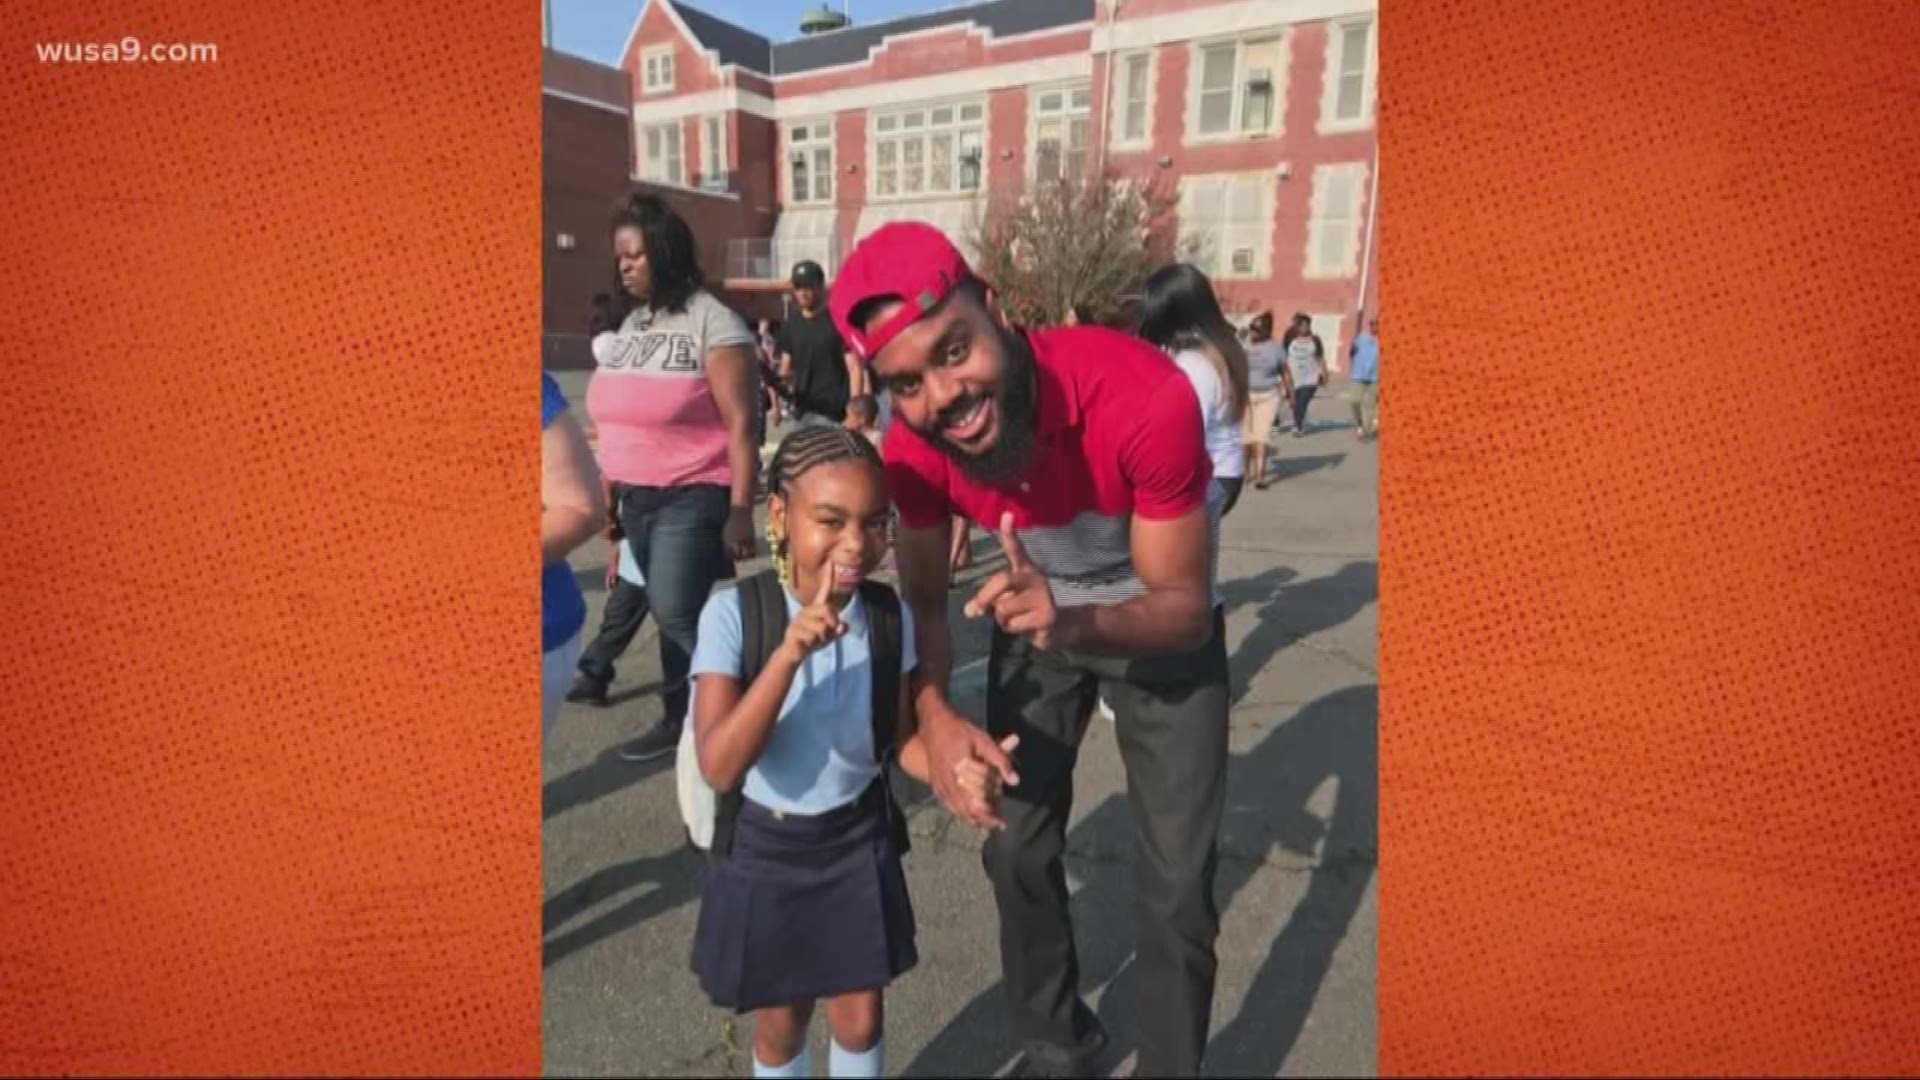 A DC principal asks dads to drop kids off to school on the first day to show their engagement with their kids. It's known as Fathers Bring Your Kids to School Day.